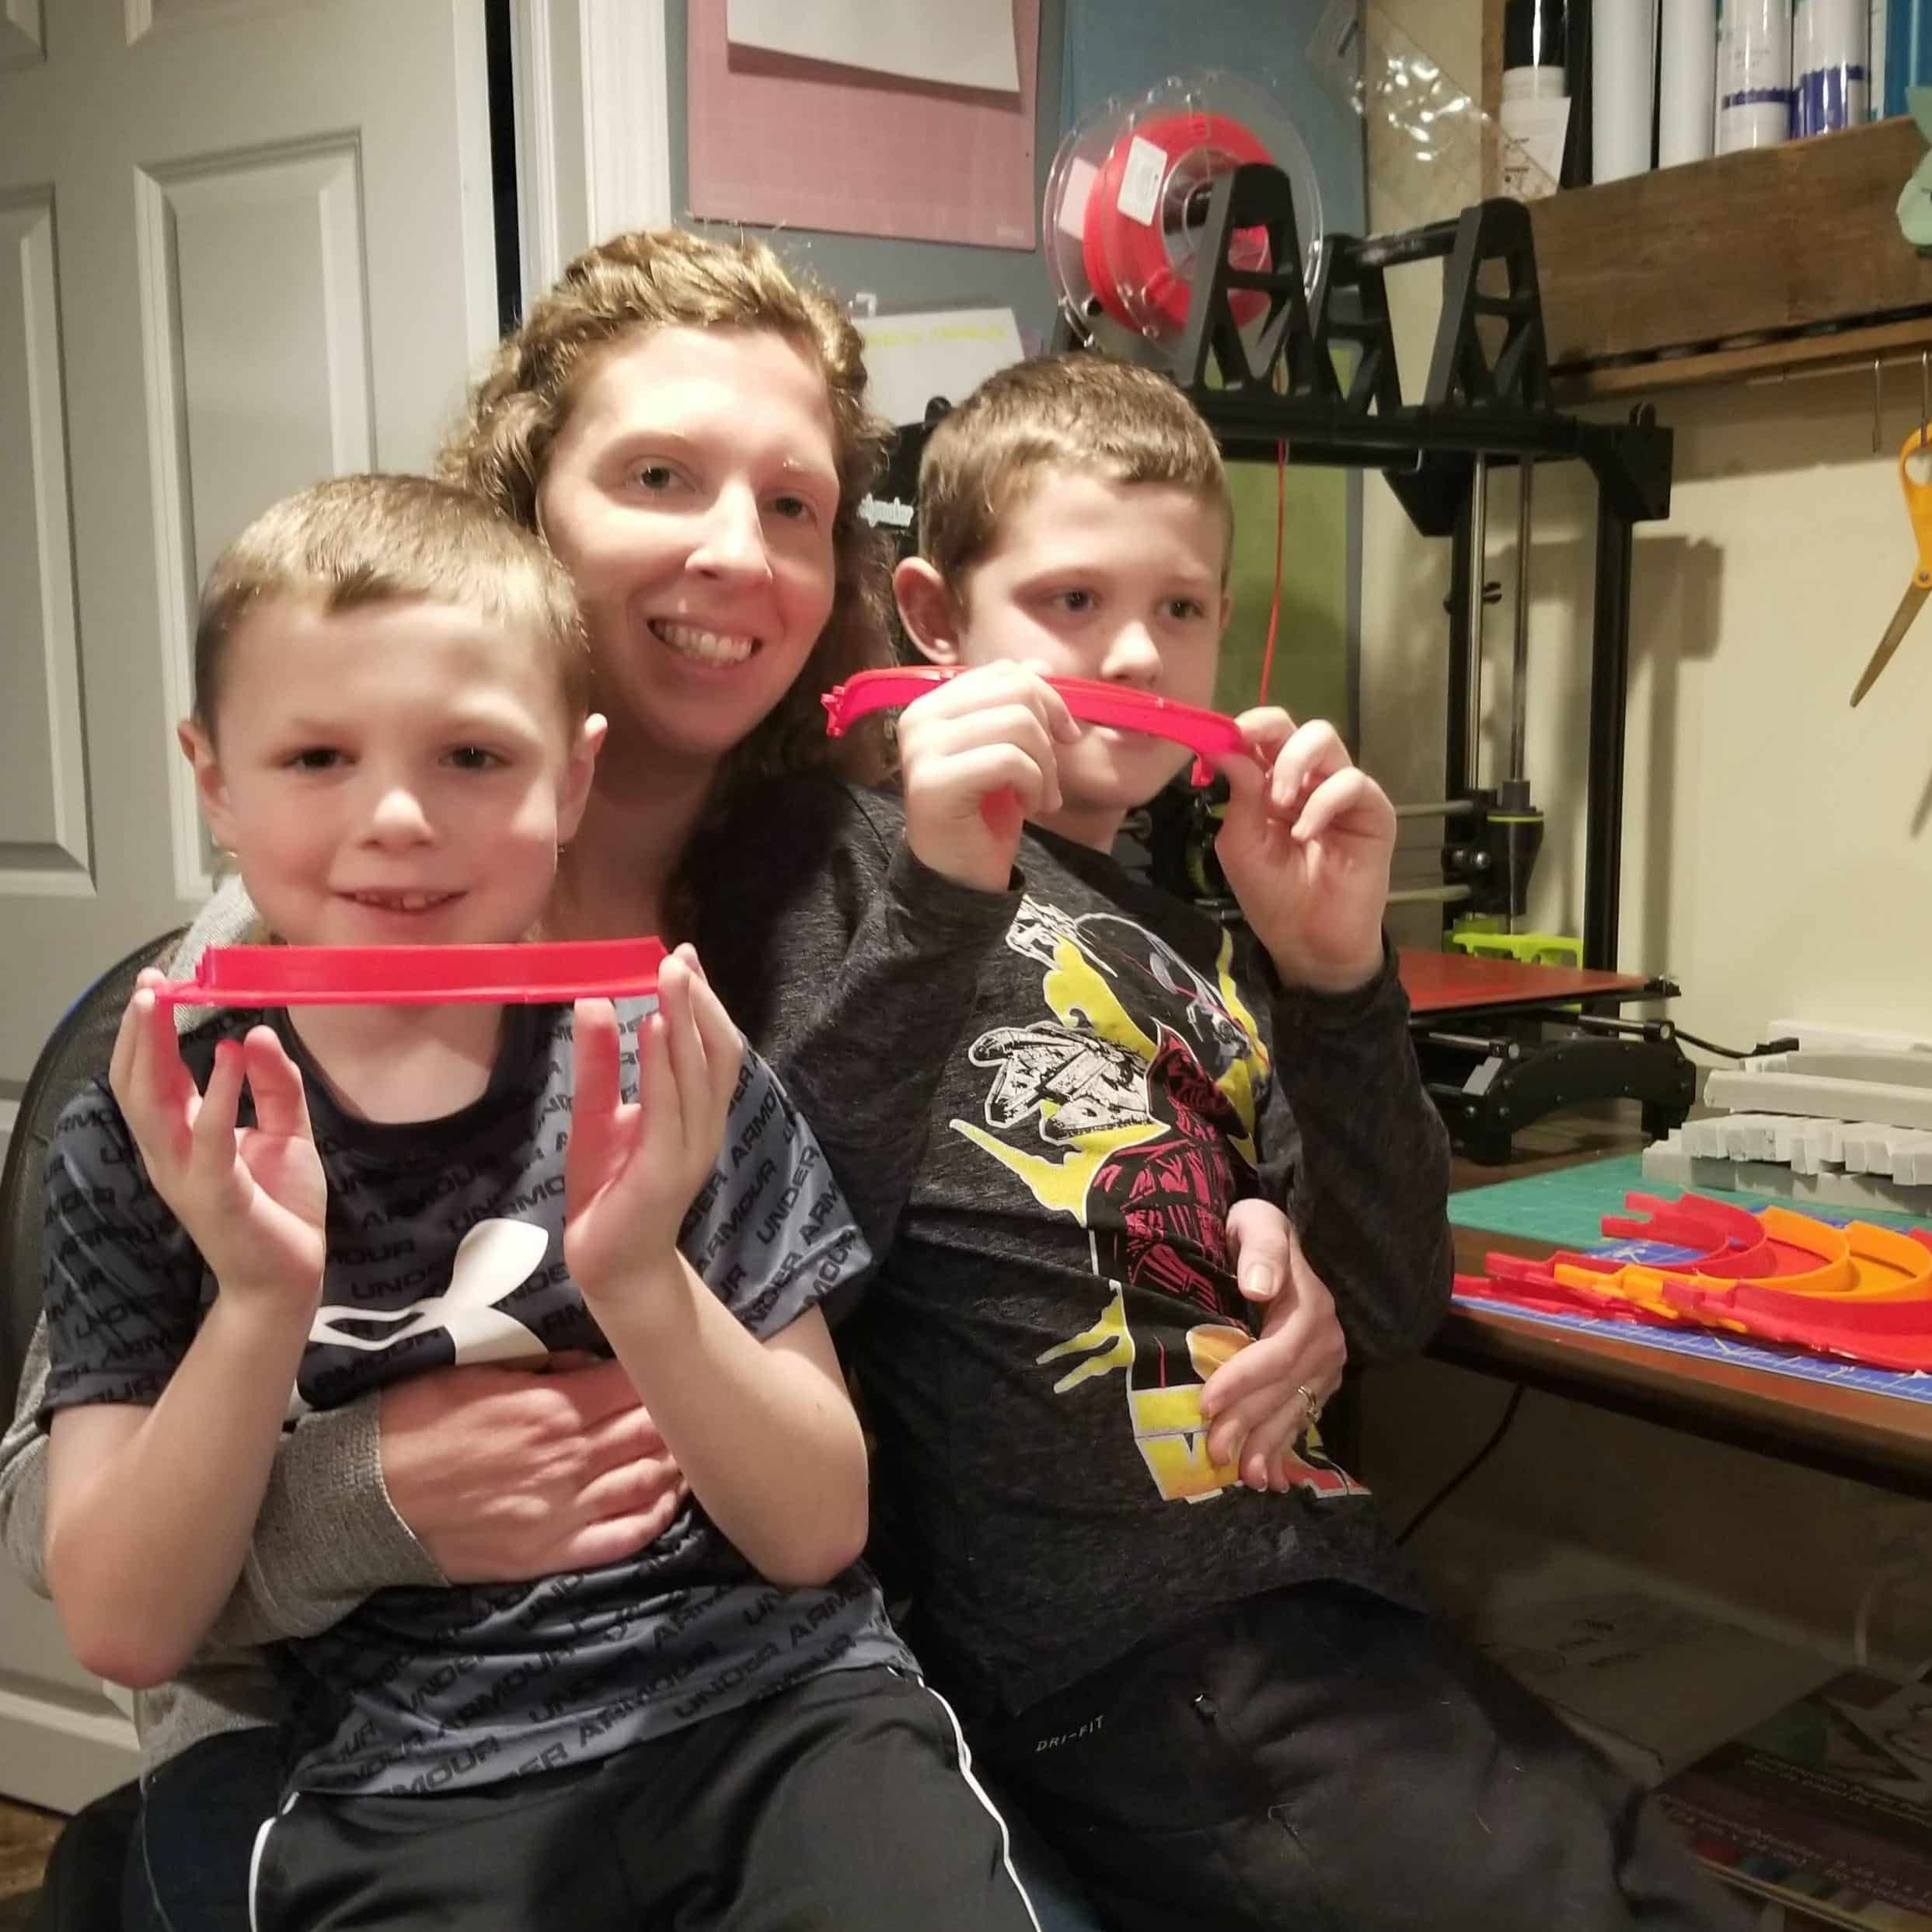 Katie and her sons helping her produce and assemble face shields.